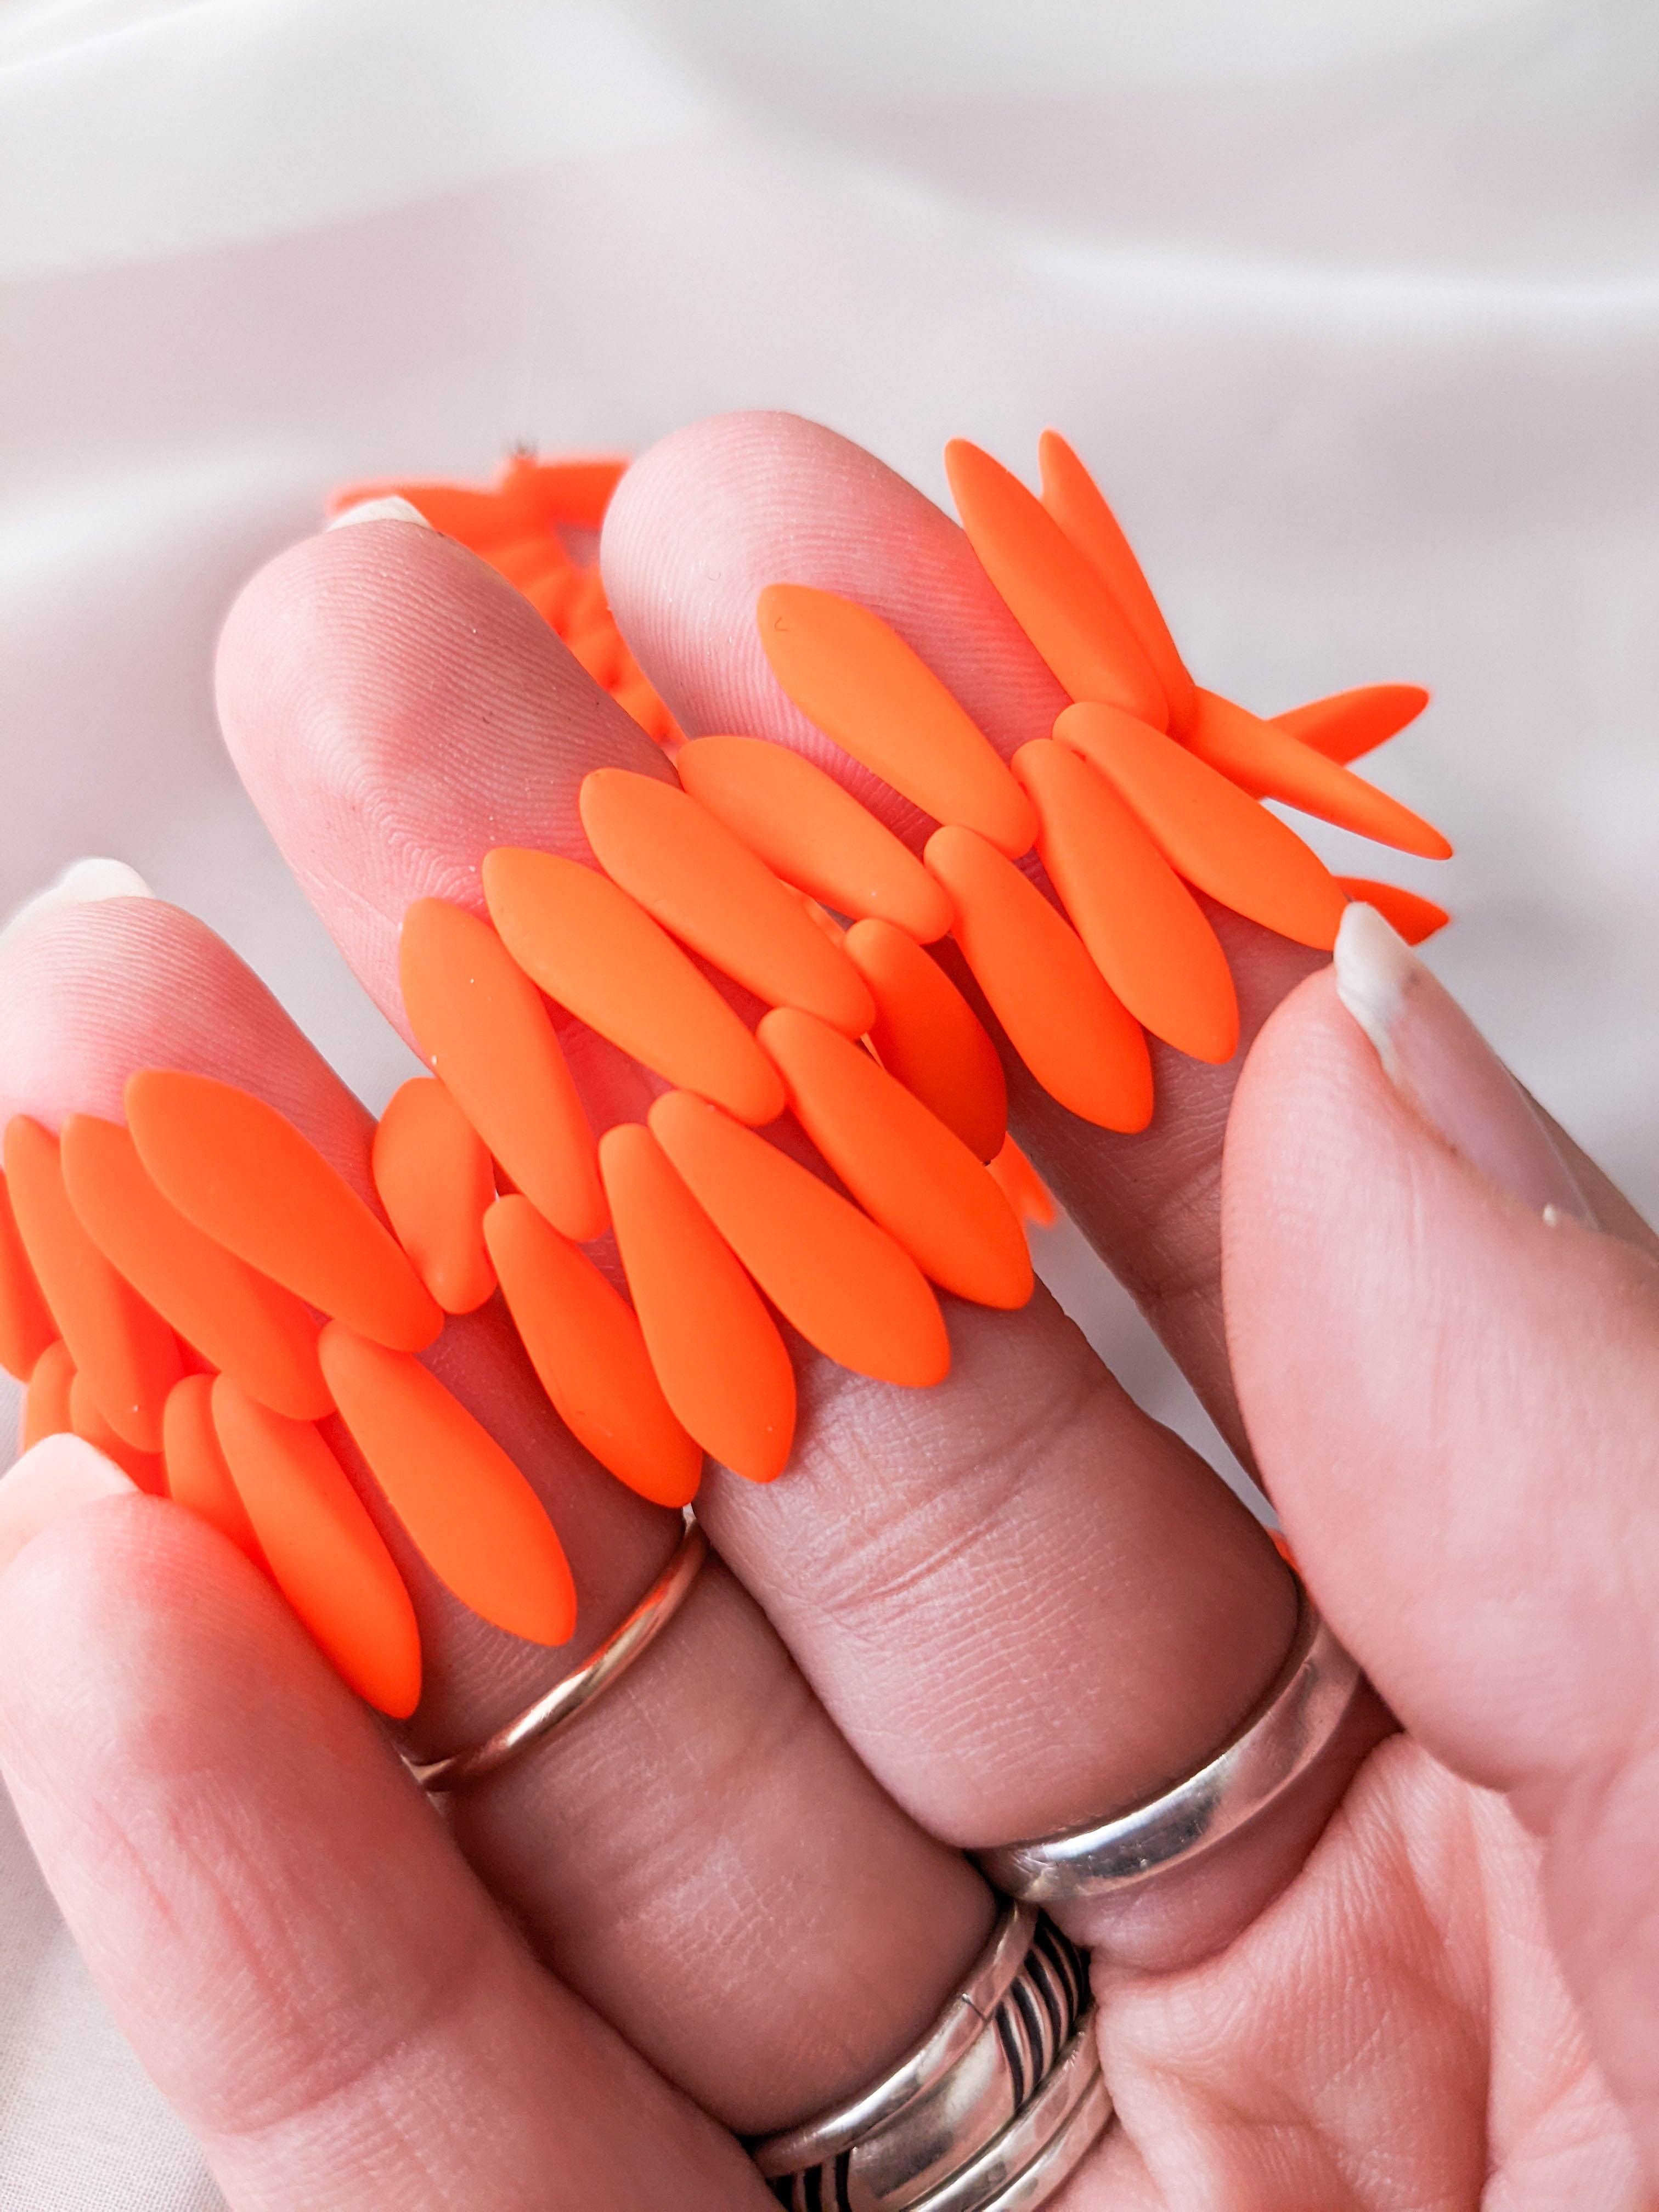 The Best Orange Nails to Recreate At Home